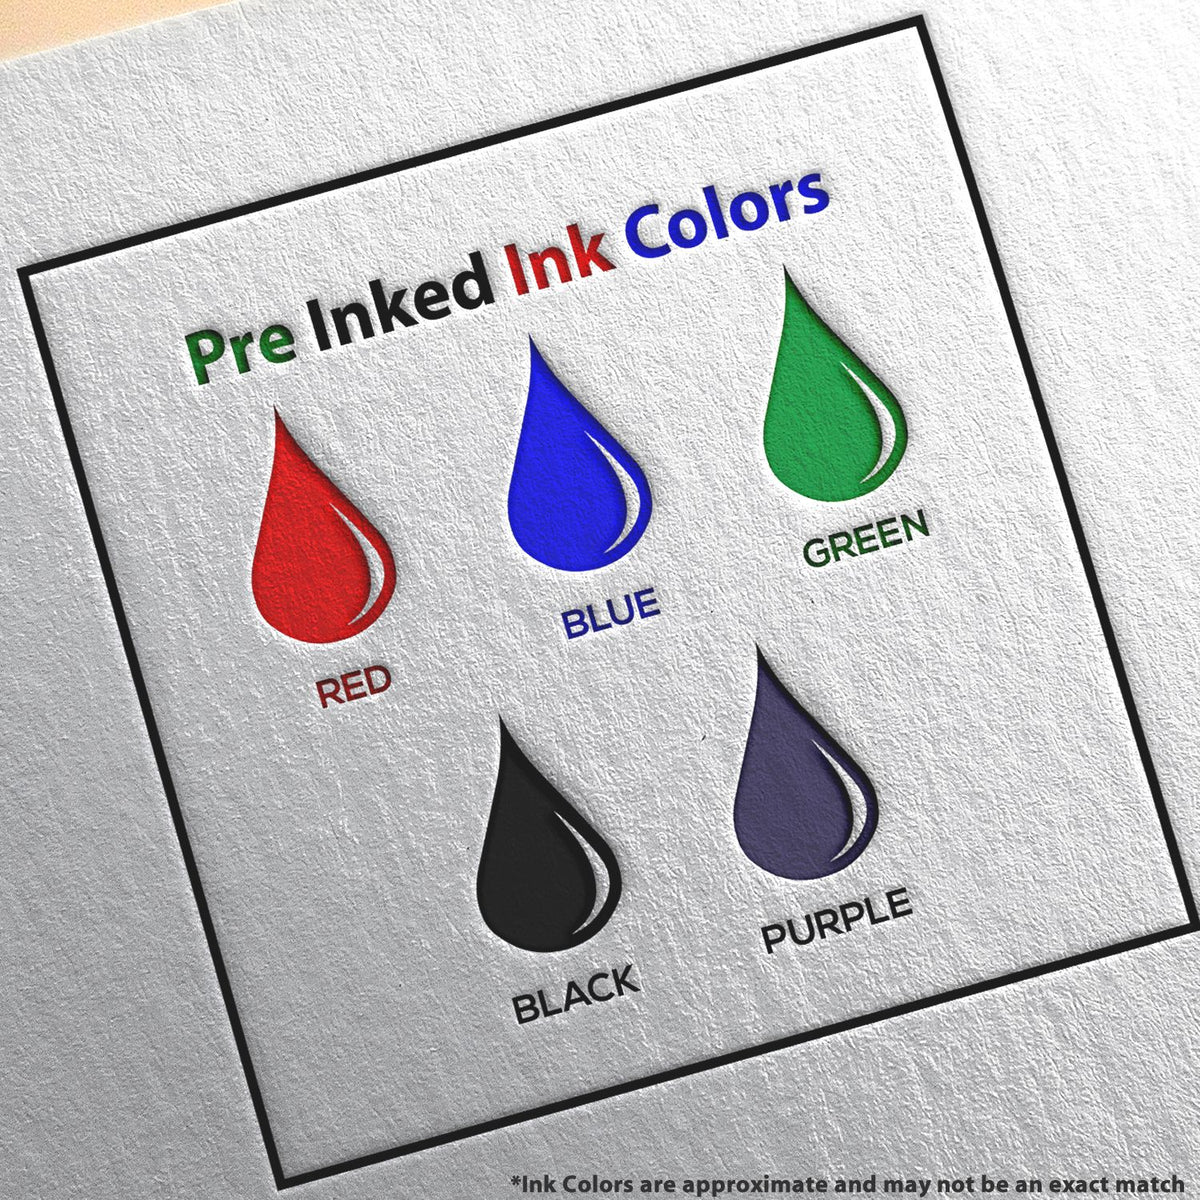 A picture showing the different ink colors or hues available for the Slim Pre-Inked Pennsylvania Land Surveyor Seal Stamp product.